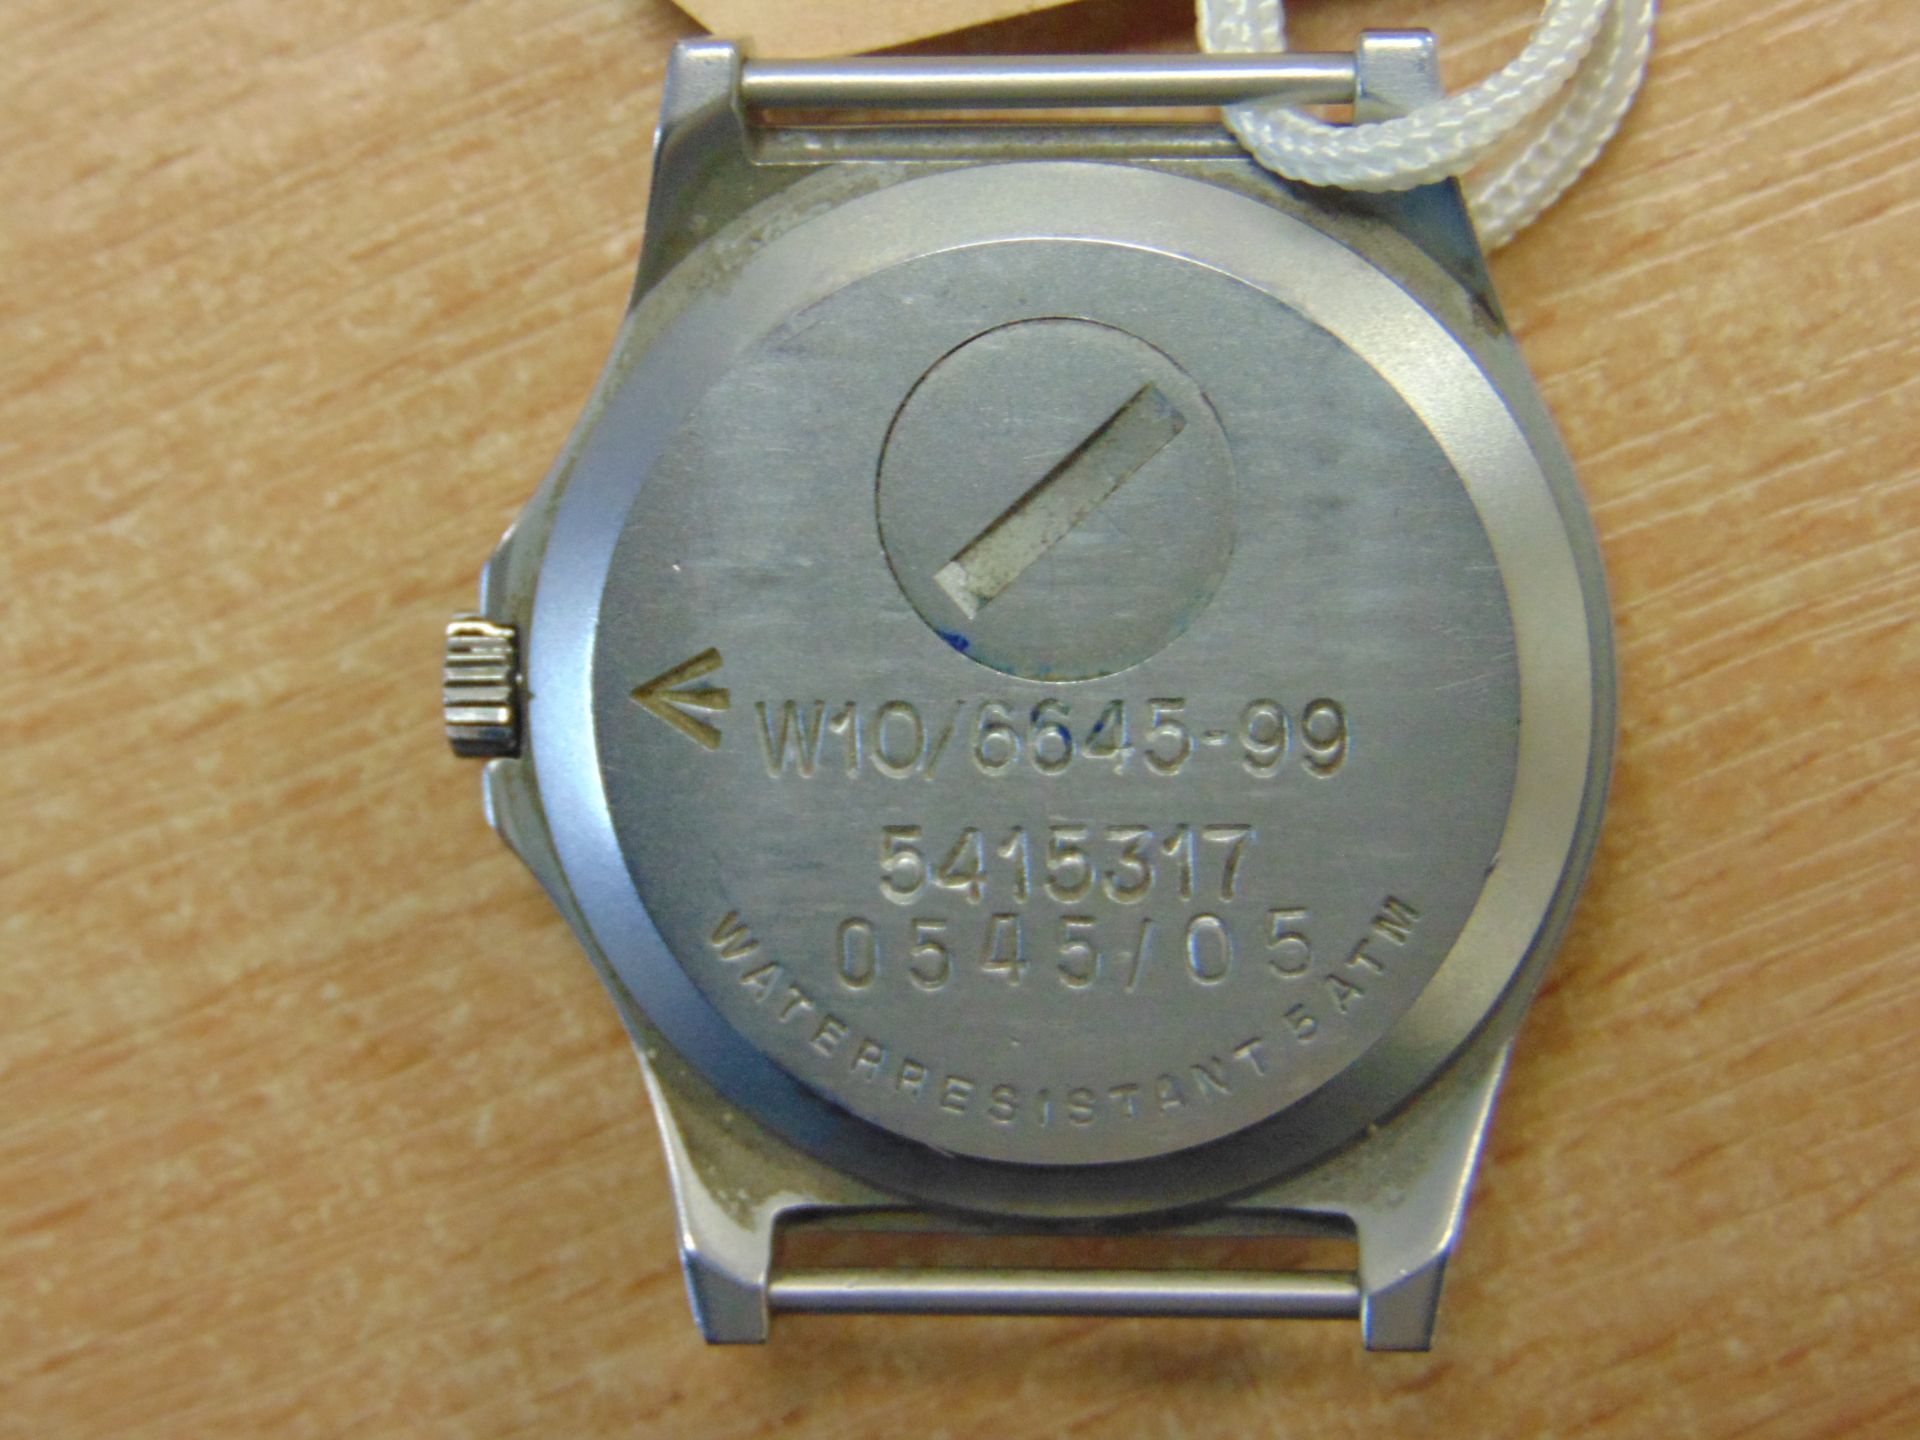 CWC W10 BRITISH ARMY SERVICE WATCH -WATER RESISTANT TO 5 ATM NATO MARKS DATE 2005 *CHIP IN GLASS* - Image 4 of 7